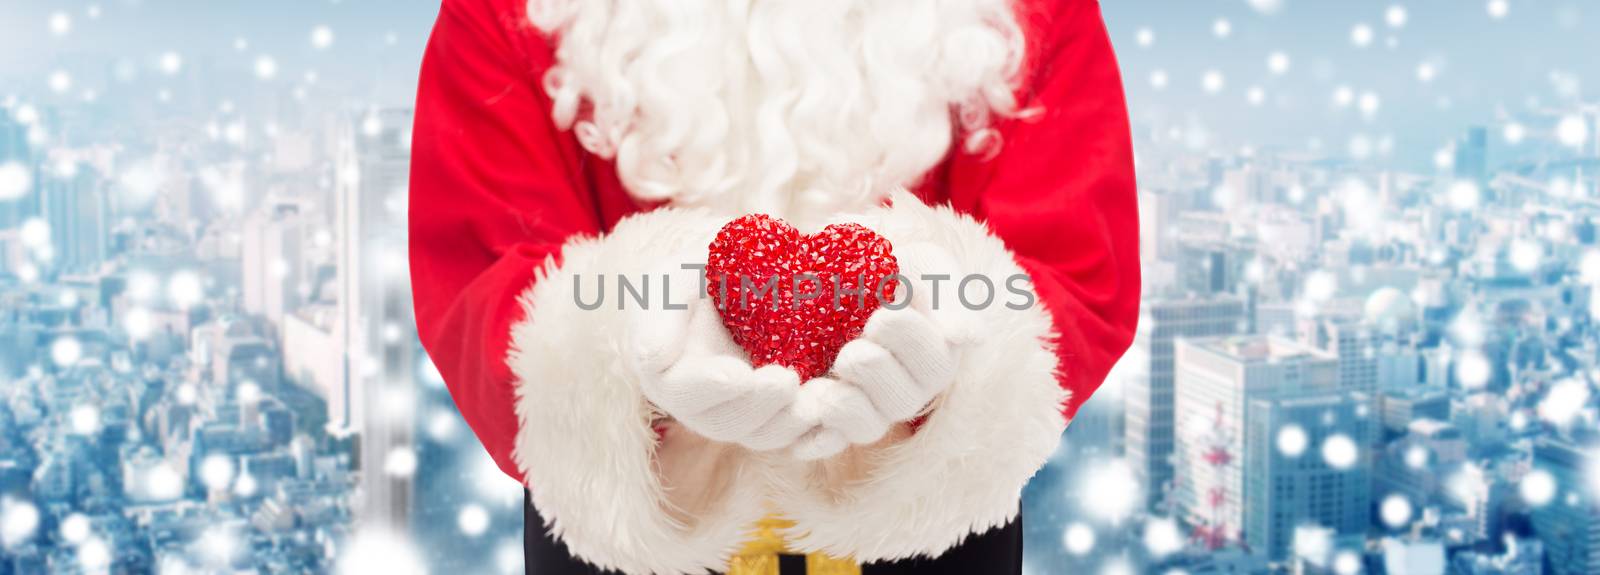 christmas, holidays, love, charity and people concept - close up of santa claus with heart shape decoration over snowy city background